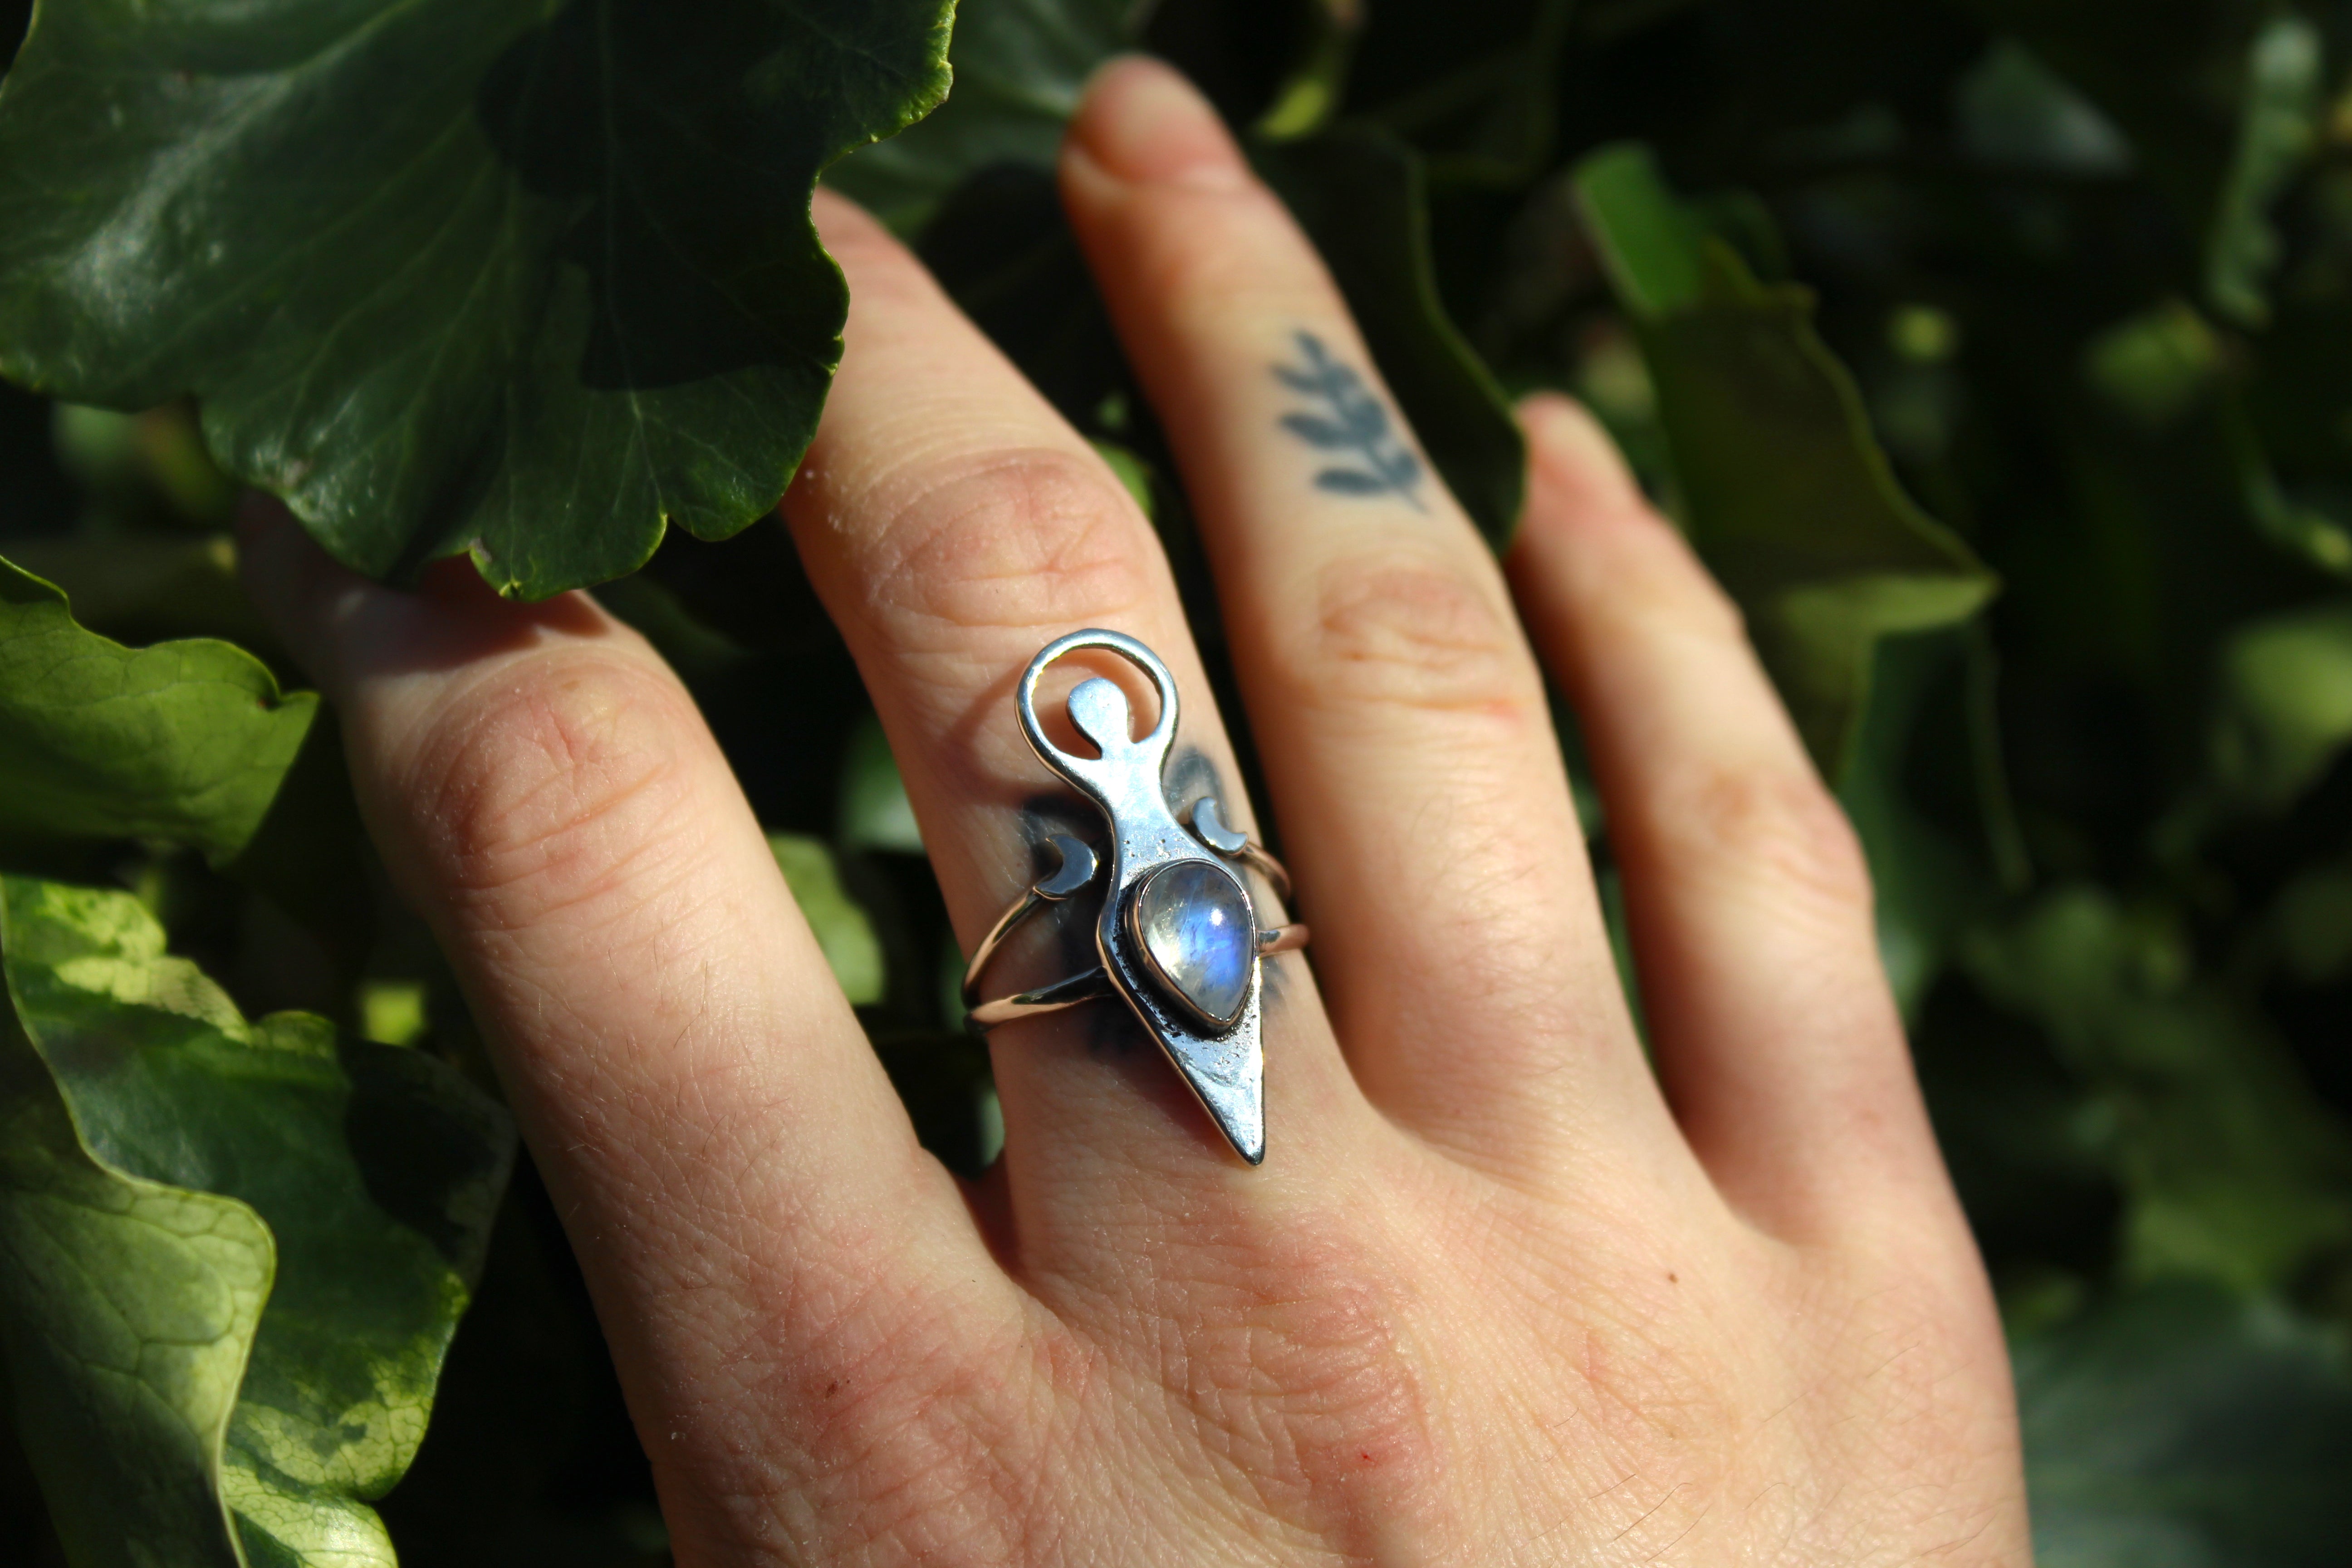 GODDESS OF TIDES Handmade Recycled Sterling Silver Ring with Rainbow Moonstone - Size N / 6.5